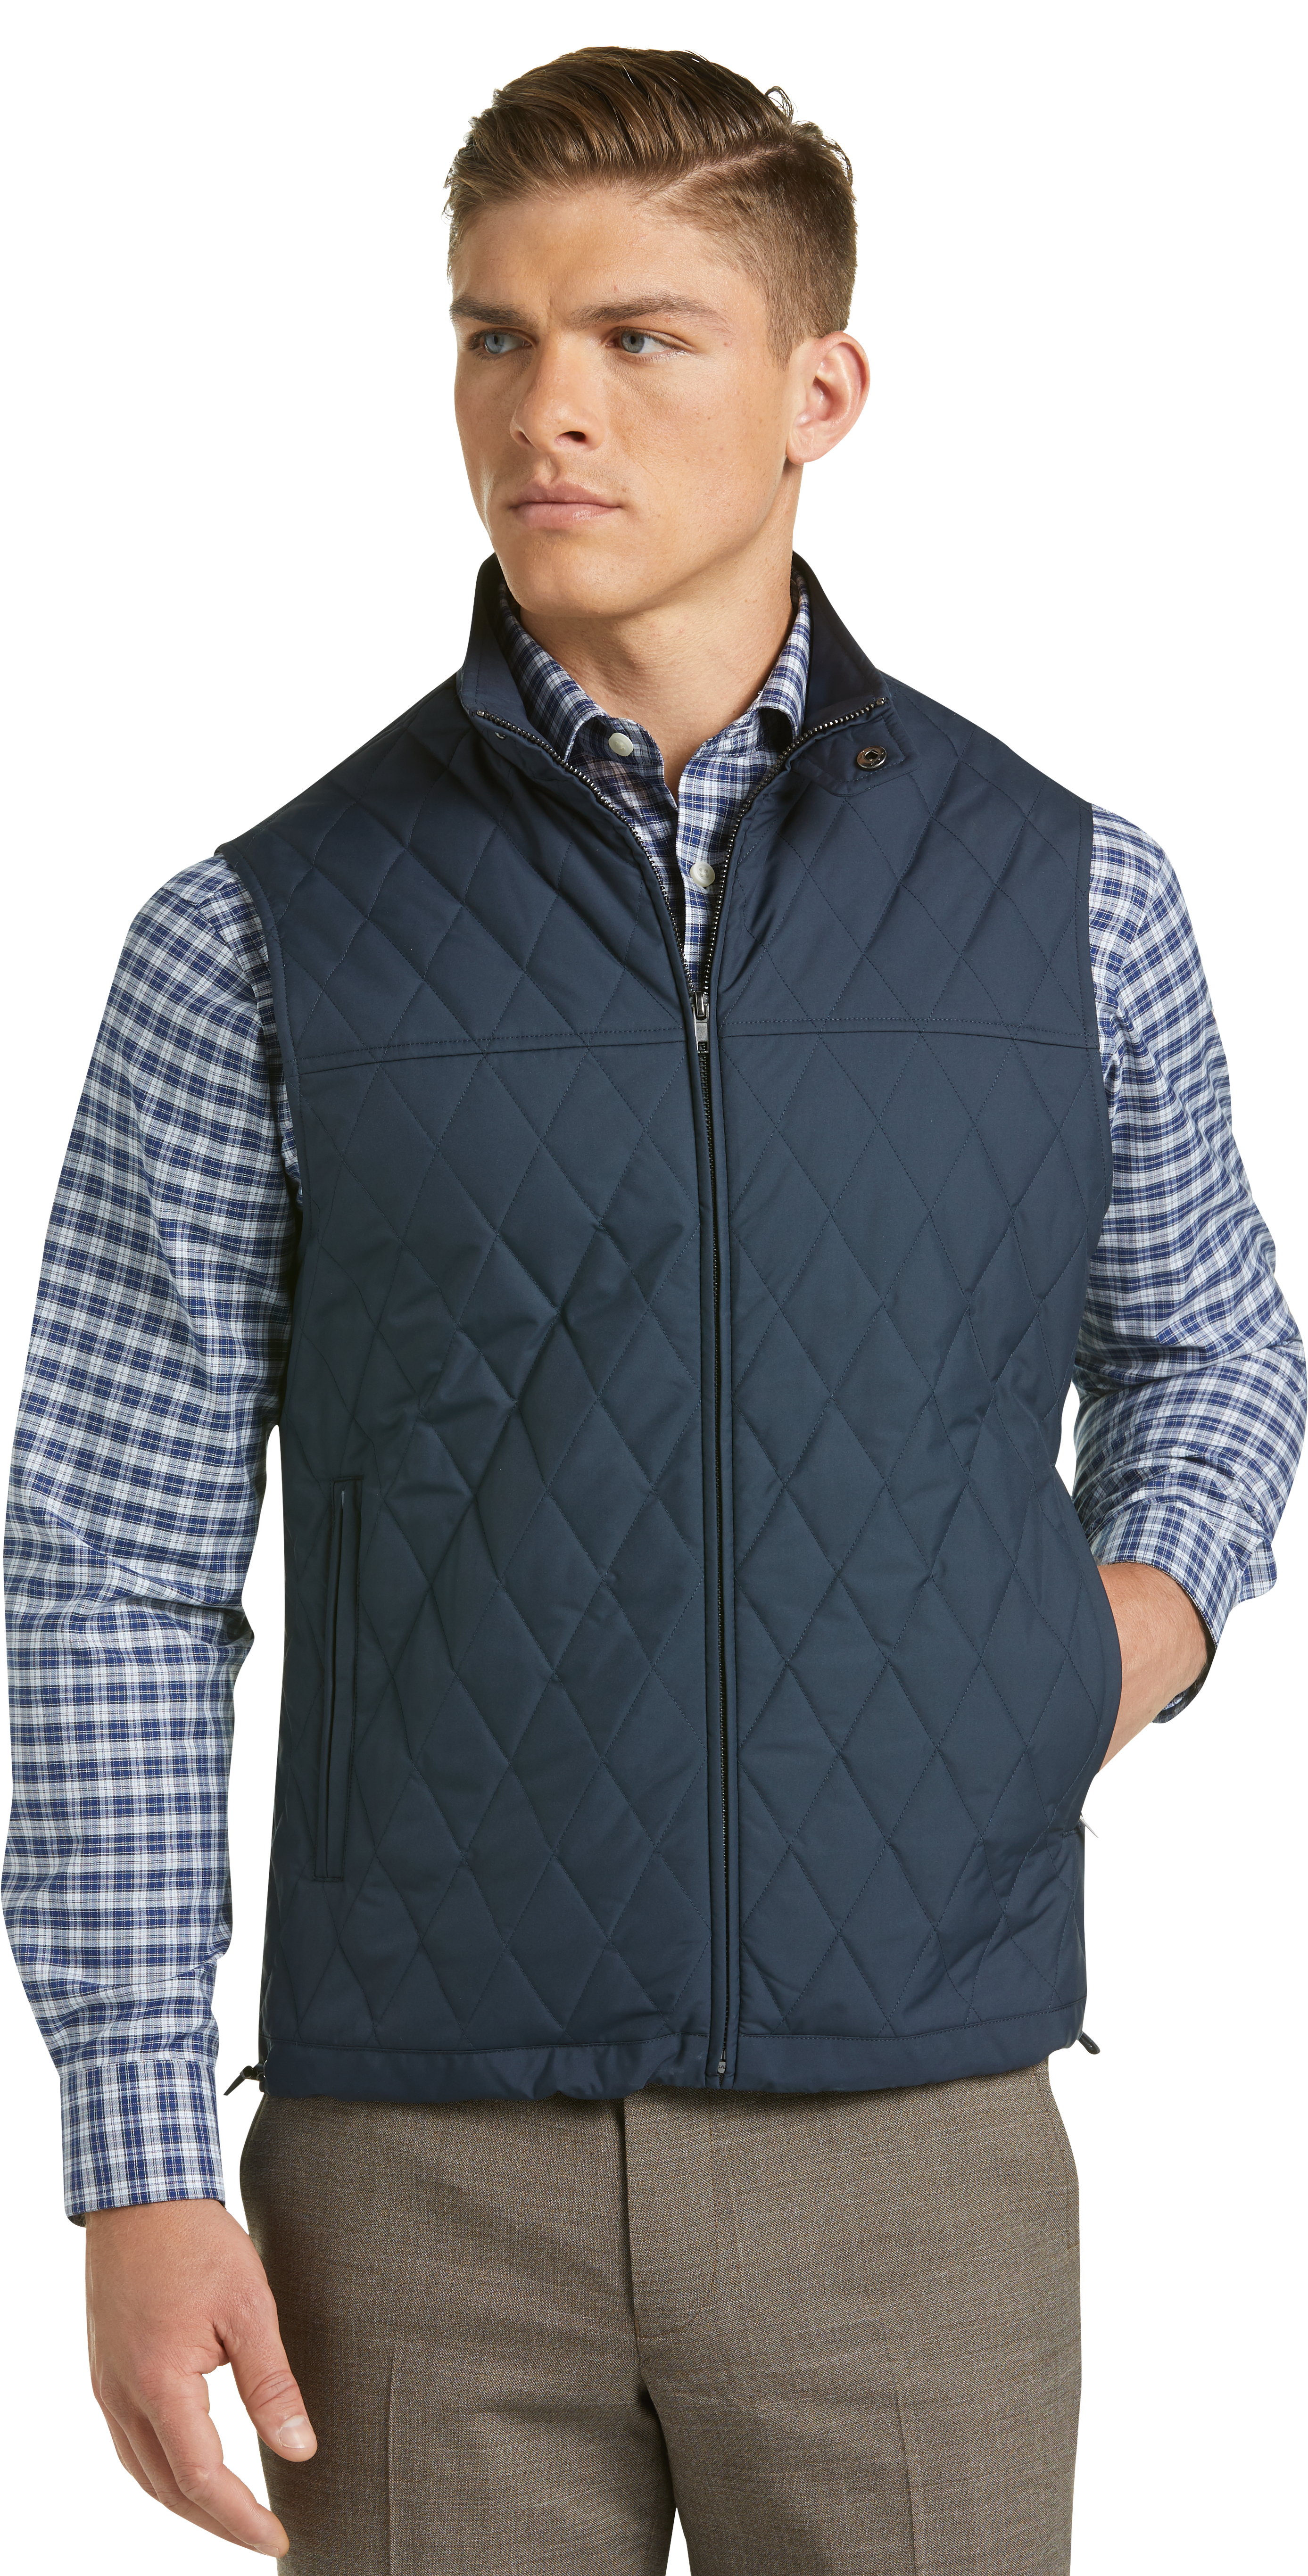 Travel Tech Tailored Fit Diamond Quilted Vest - Big & Tall CLEARANCE ...